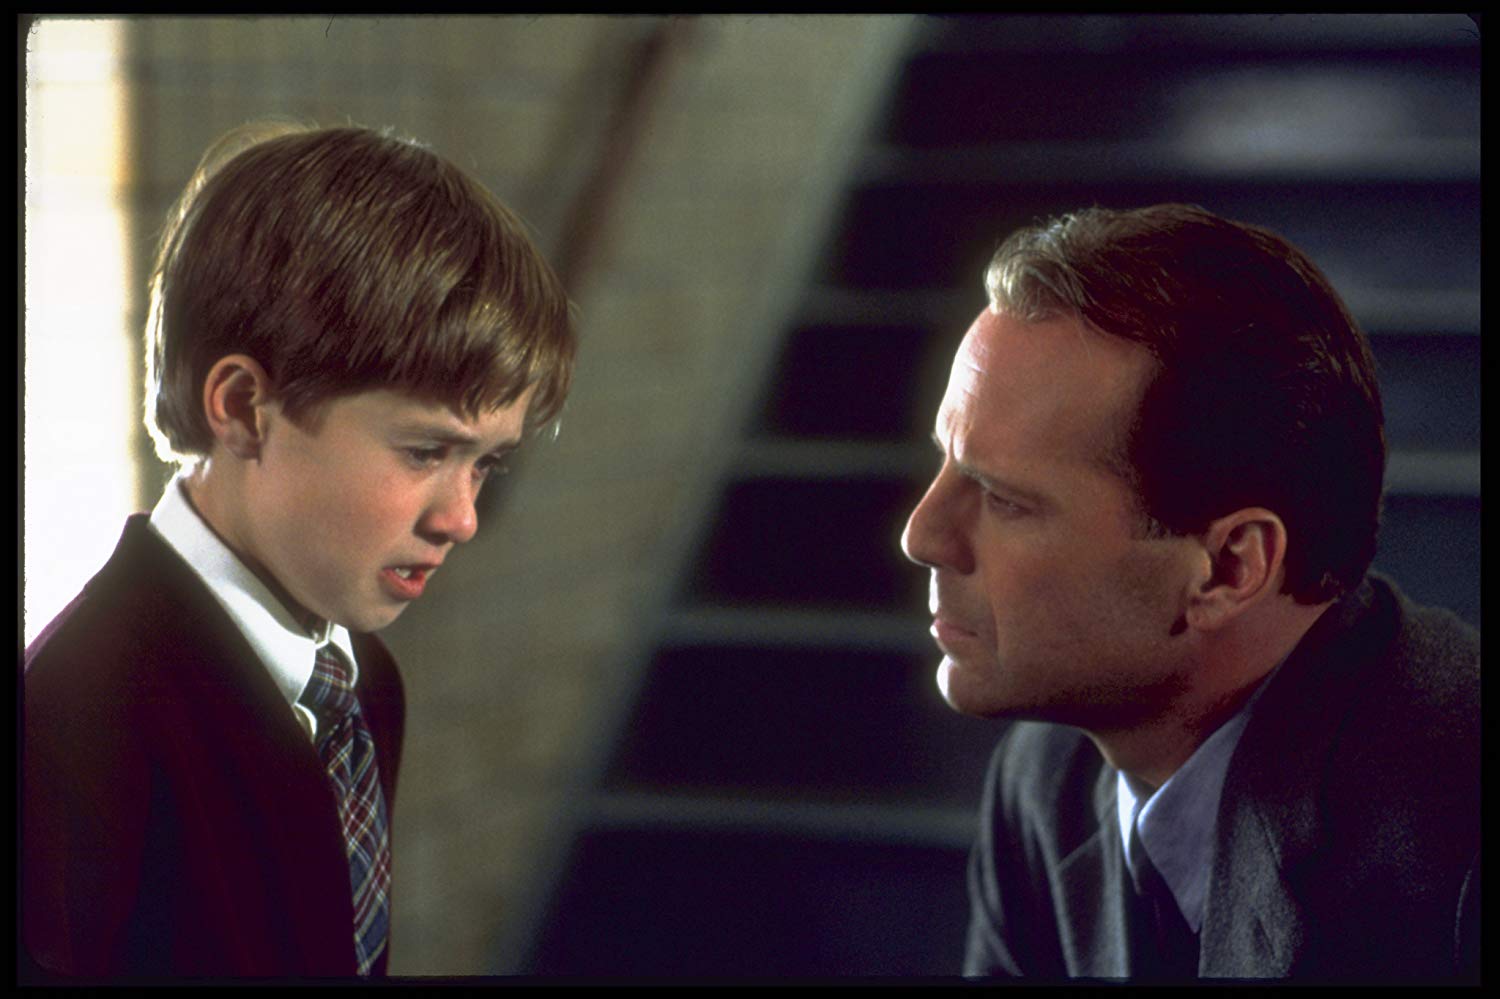 20 years on, The Sixth Sense is a great movie that works exactly